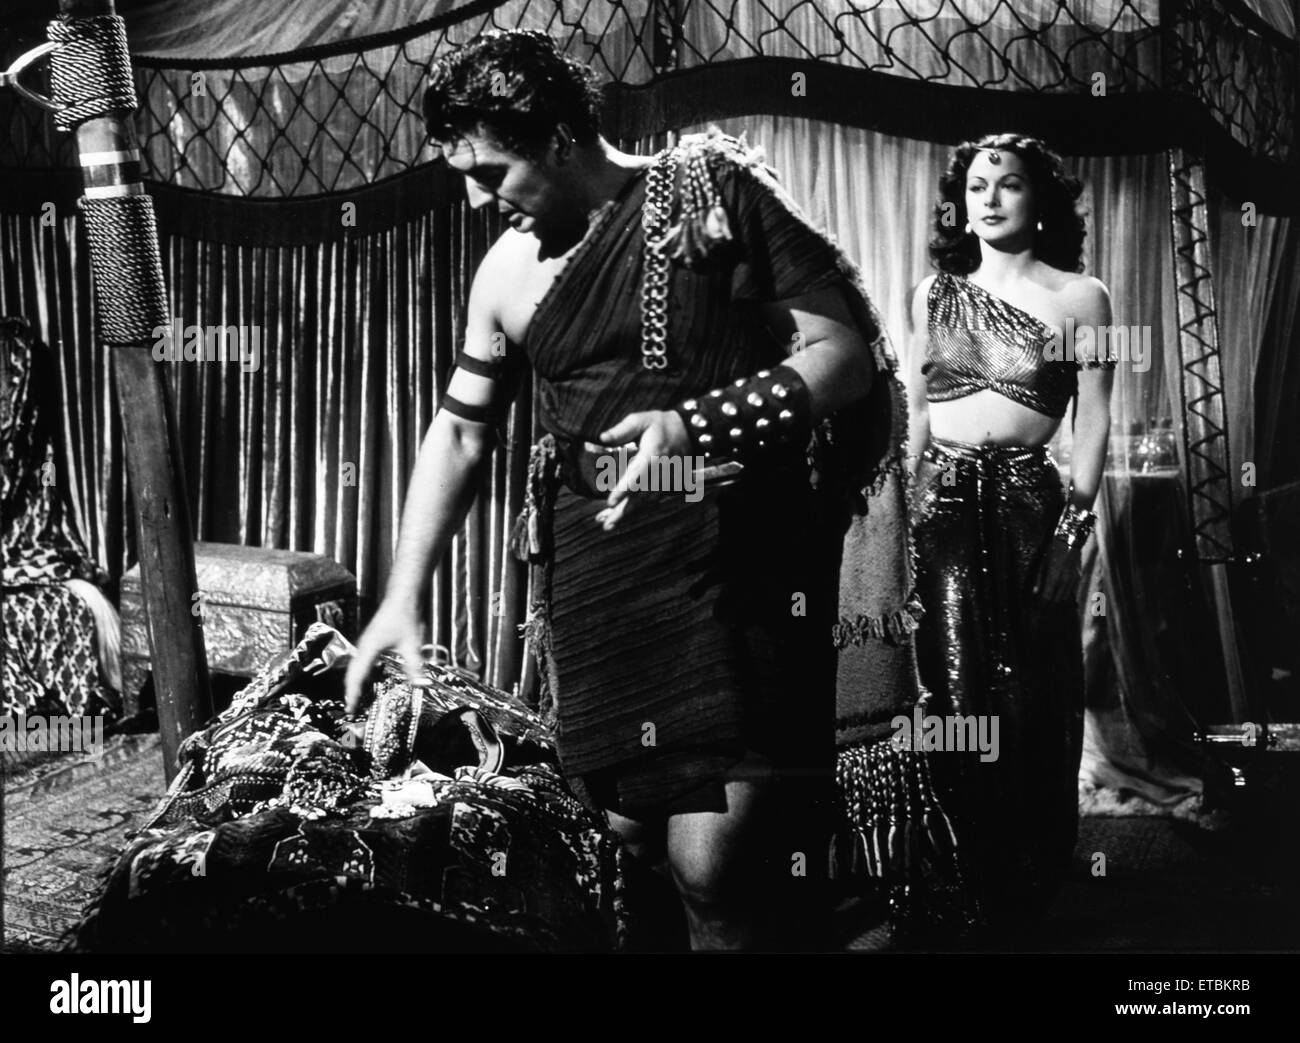 Victor Mature, Hedy Lamarr, on-set of the Film "Samson and Delilah", 1949 Stock Photo